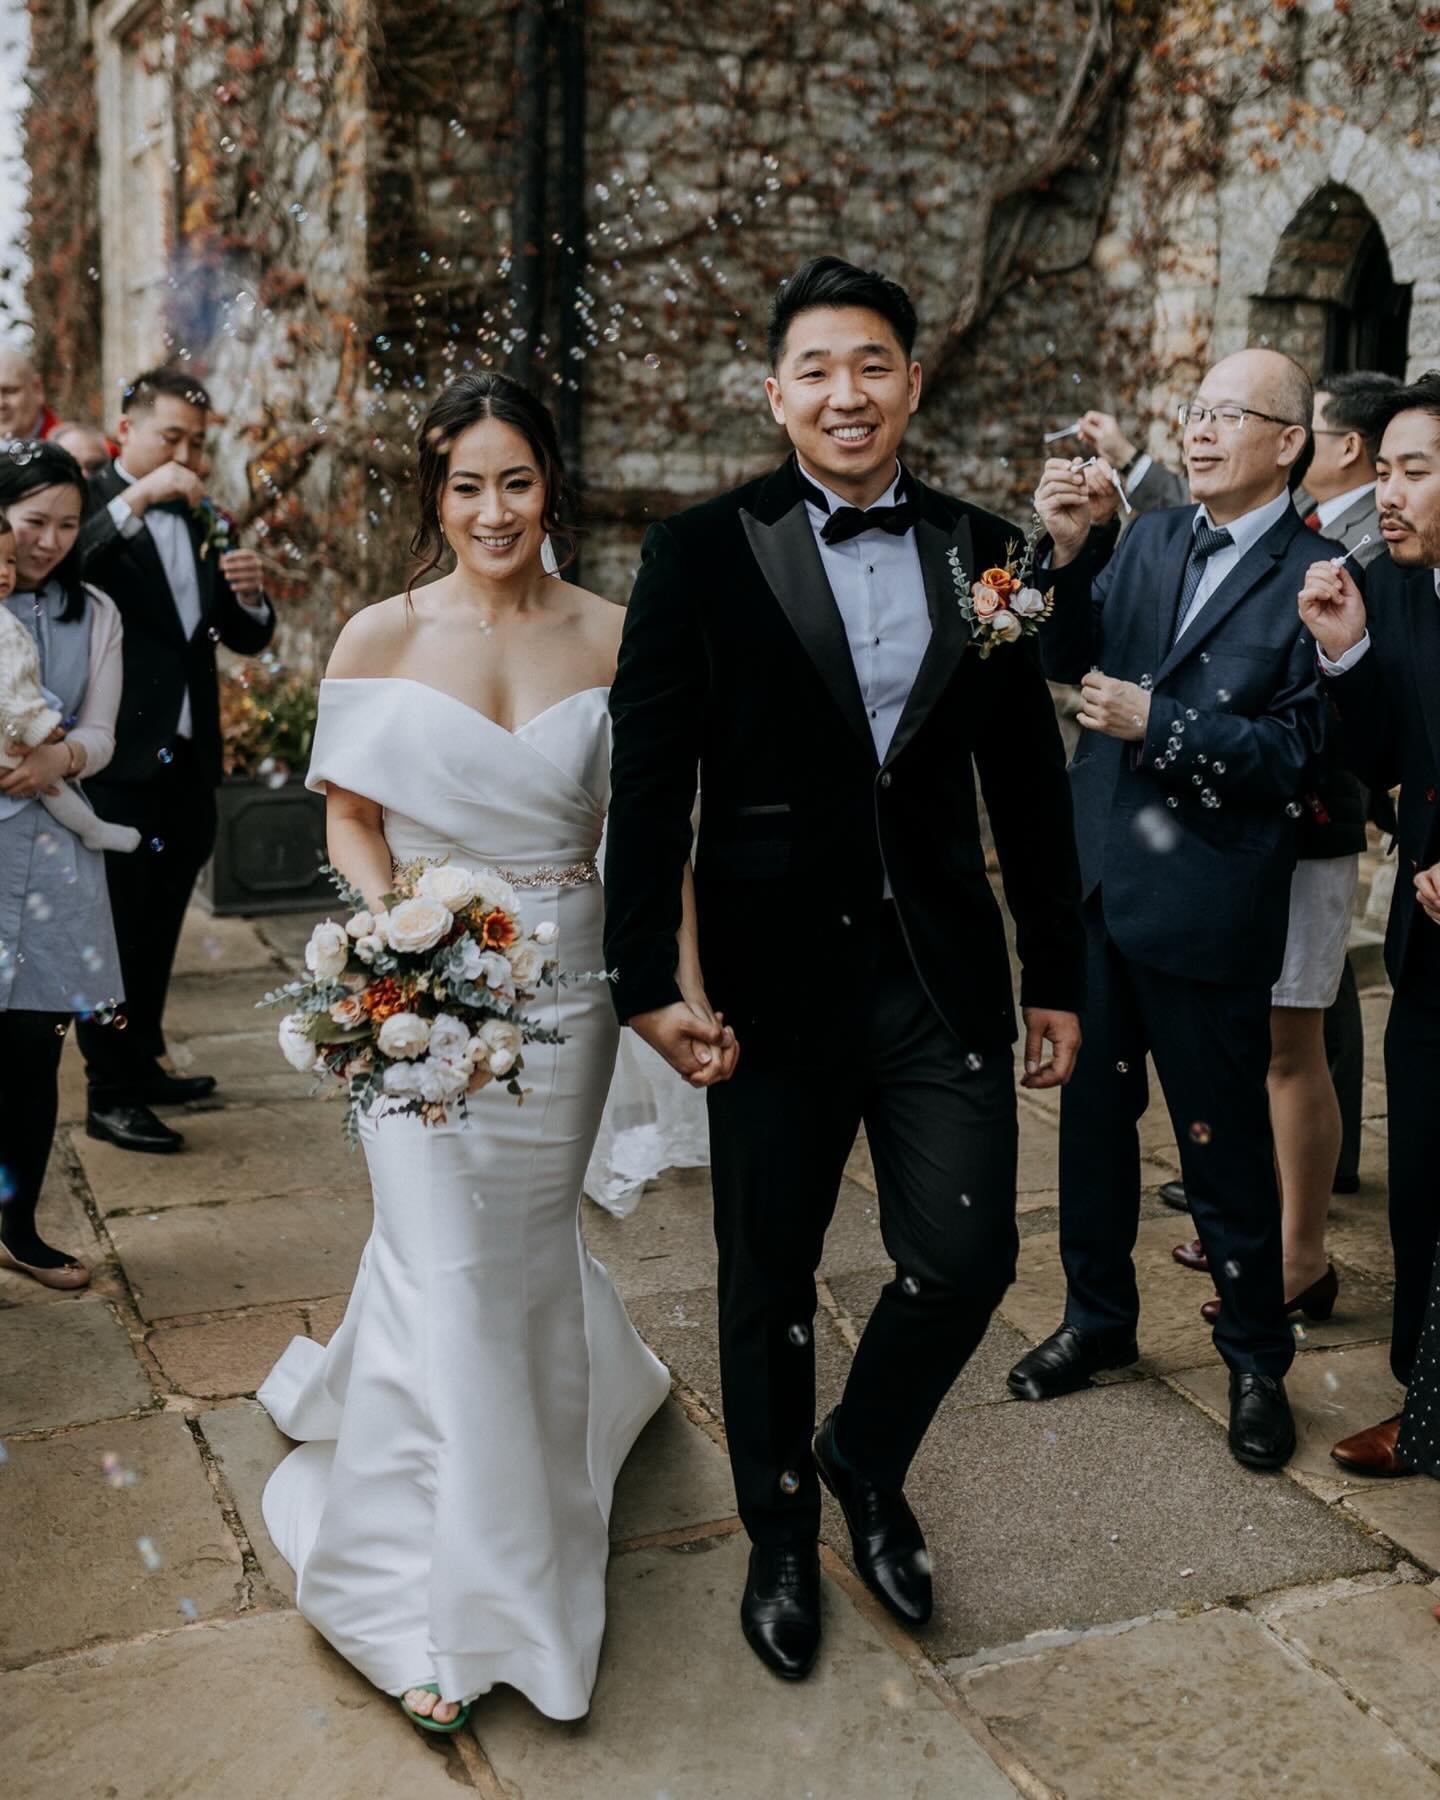 Ray and Carmen tied the knot in glamorous black tie style at the rather awesome Eastwell Manor. A family affair with multicultural traditions, smiles, laughs, bubbles, and a very wicked games console station. @eastwellmanor definitely brings somethin